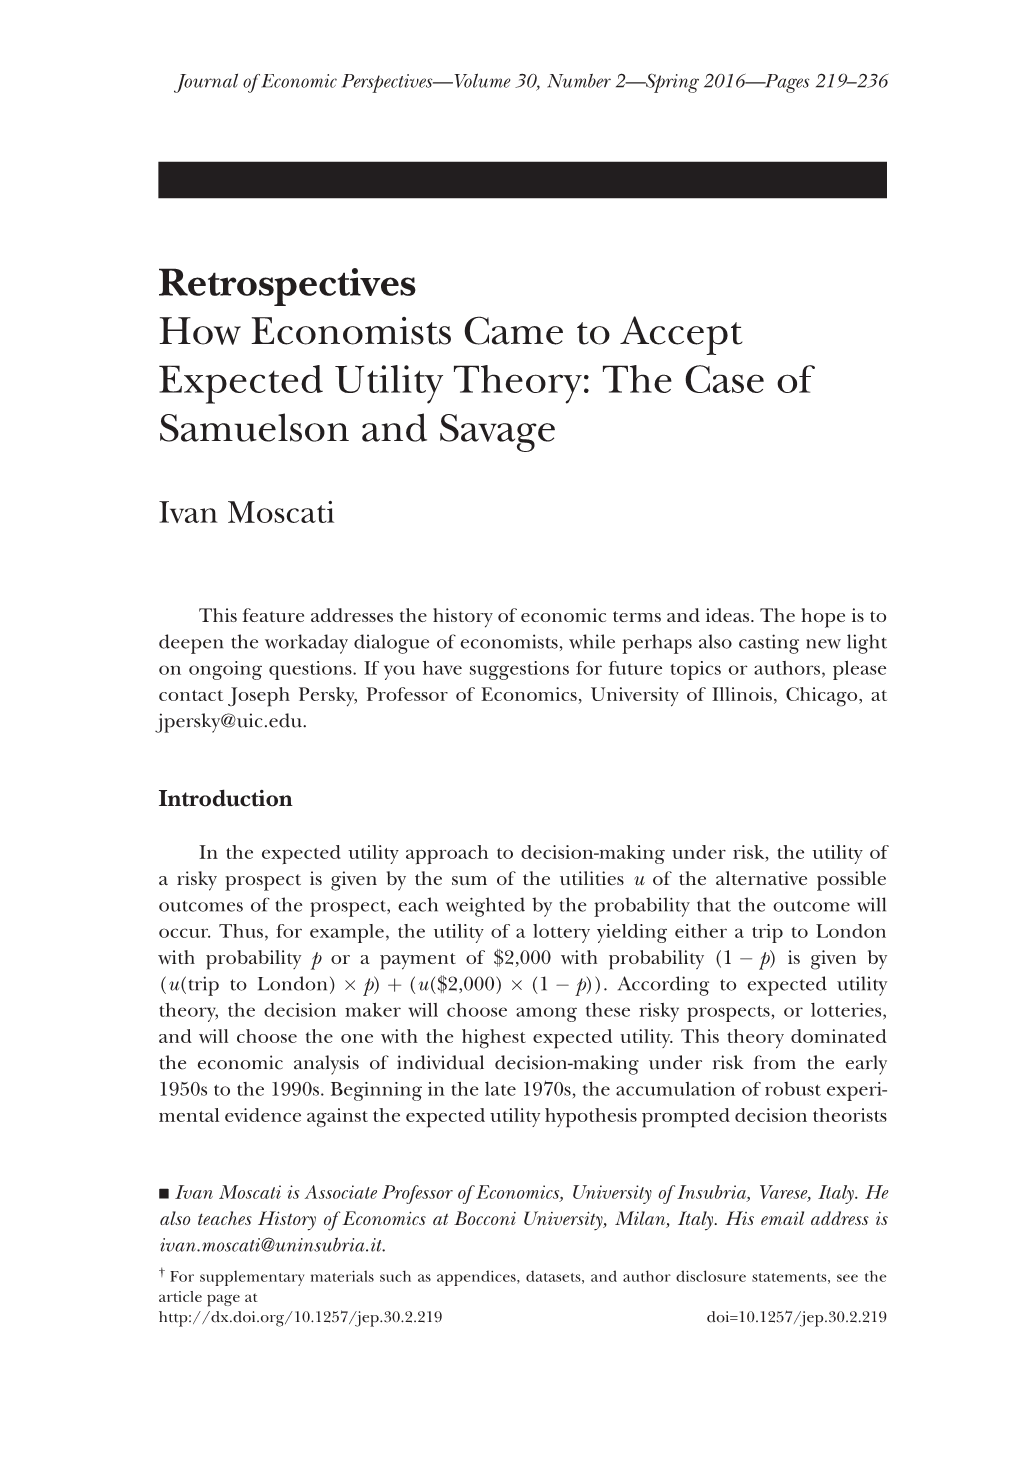 How Economists Came to Accept Expected Utility Theory: the Case of Samuelson and Savage